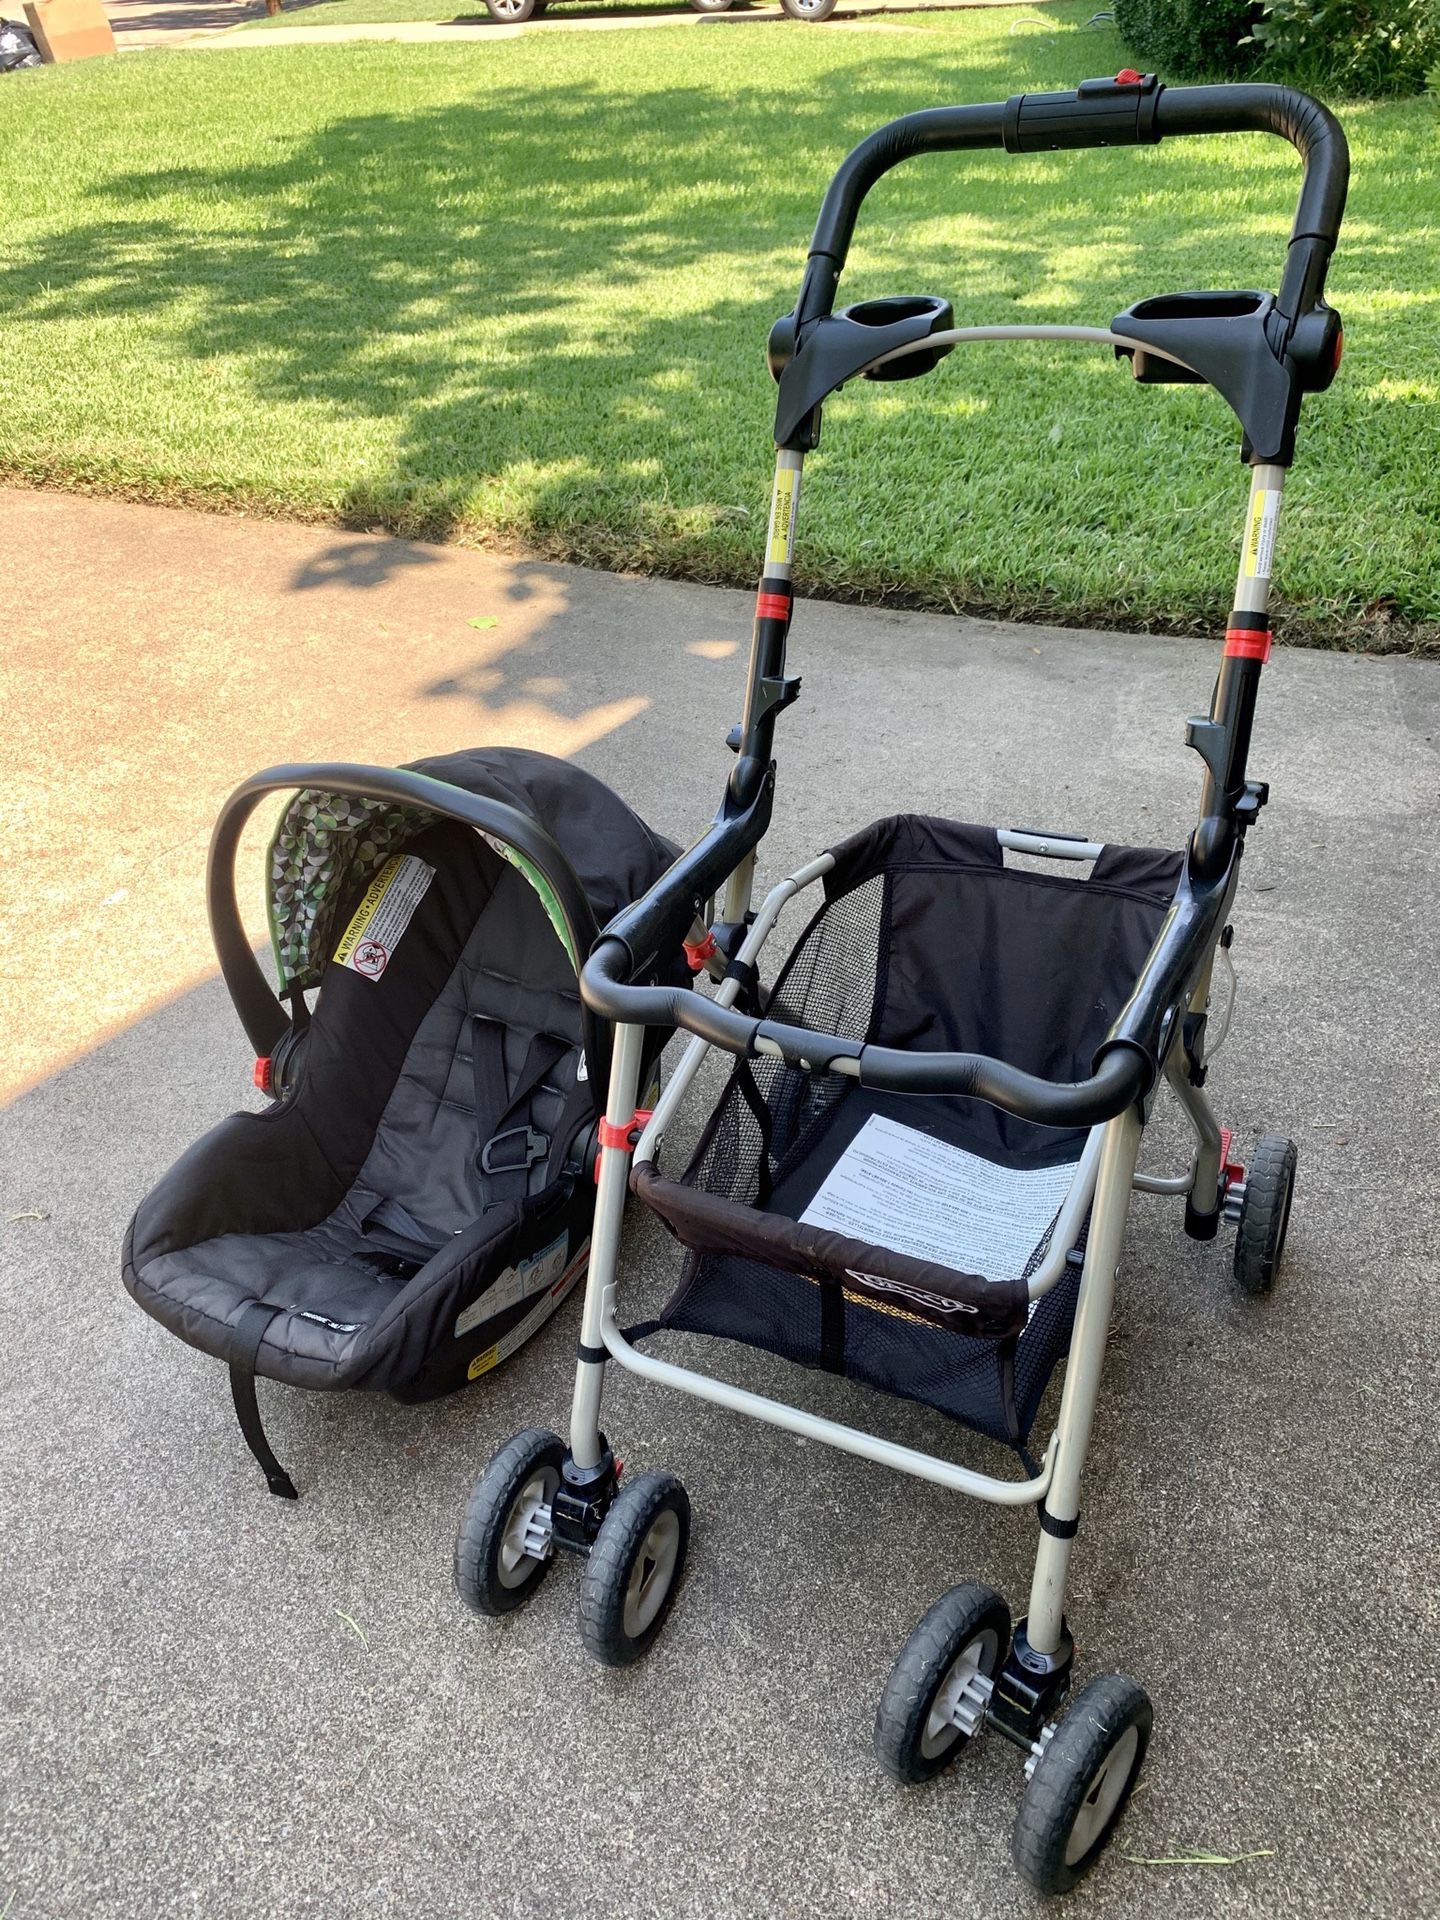 GRACO snap and go stroller and car seat